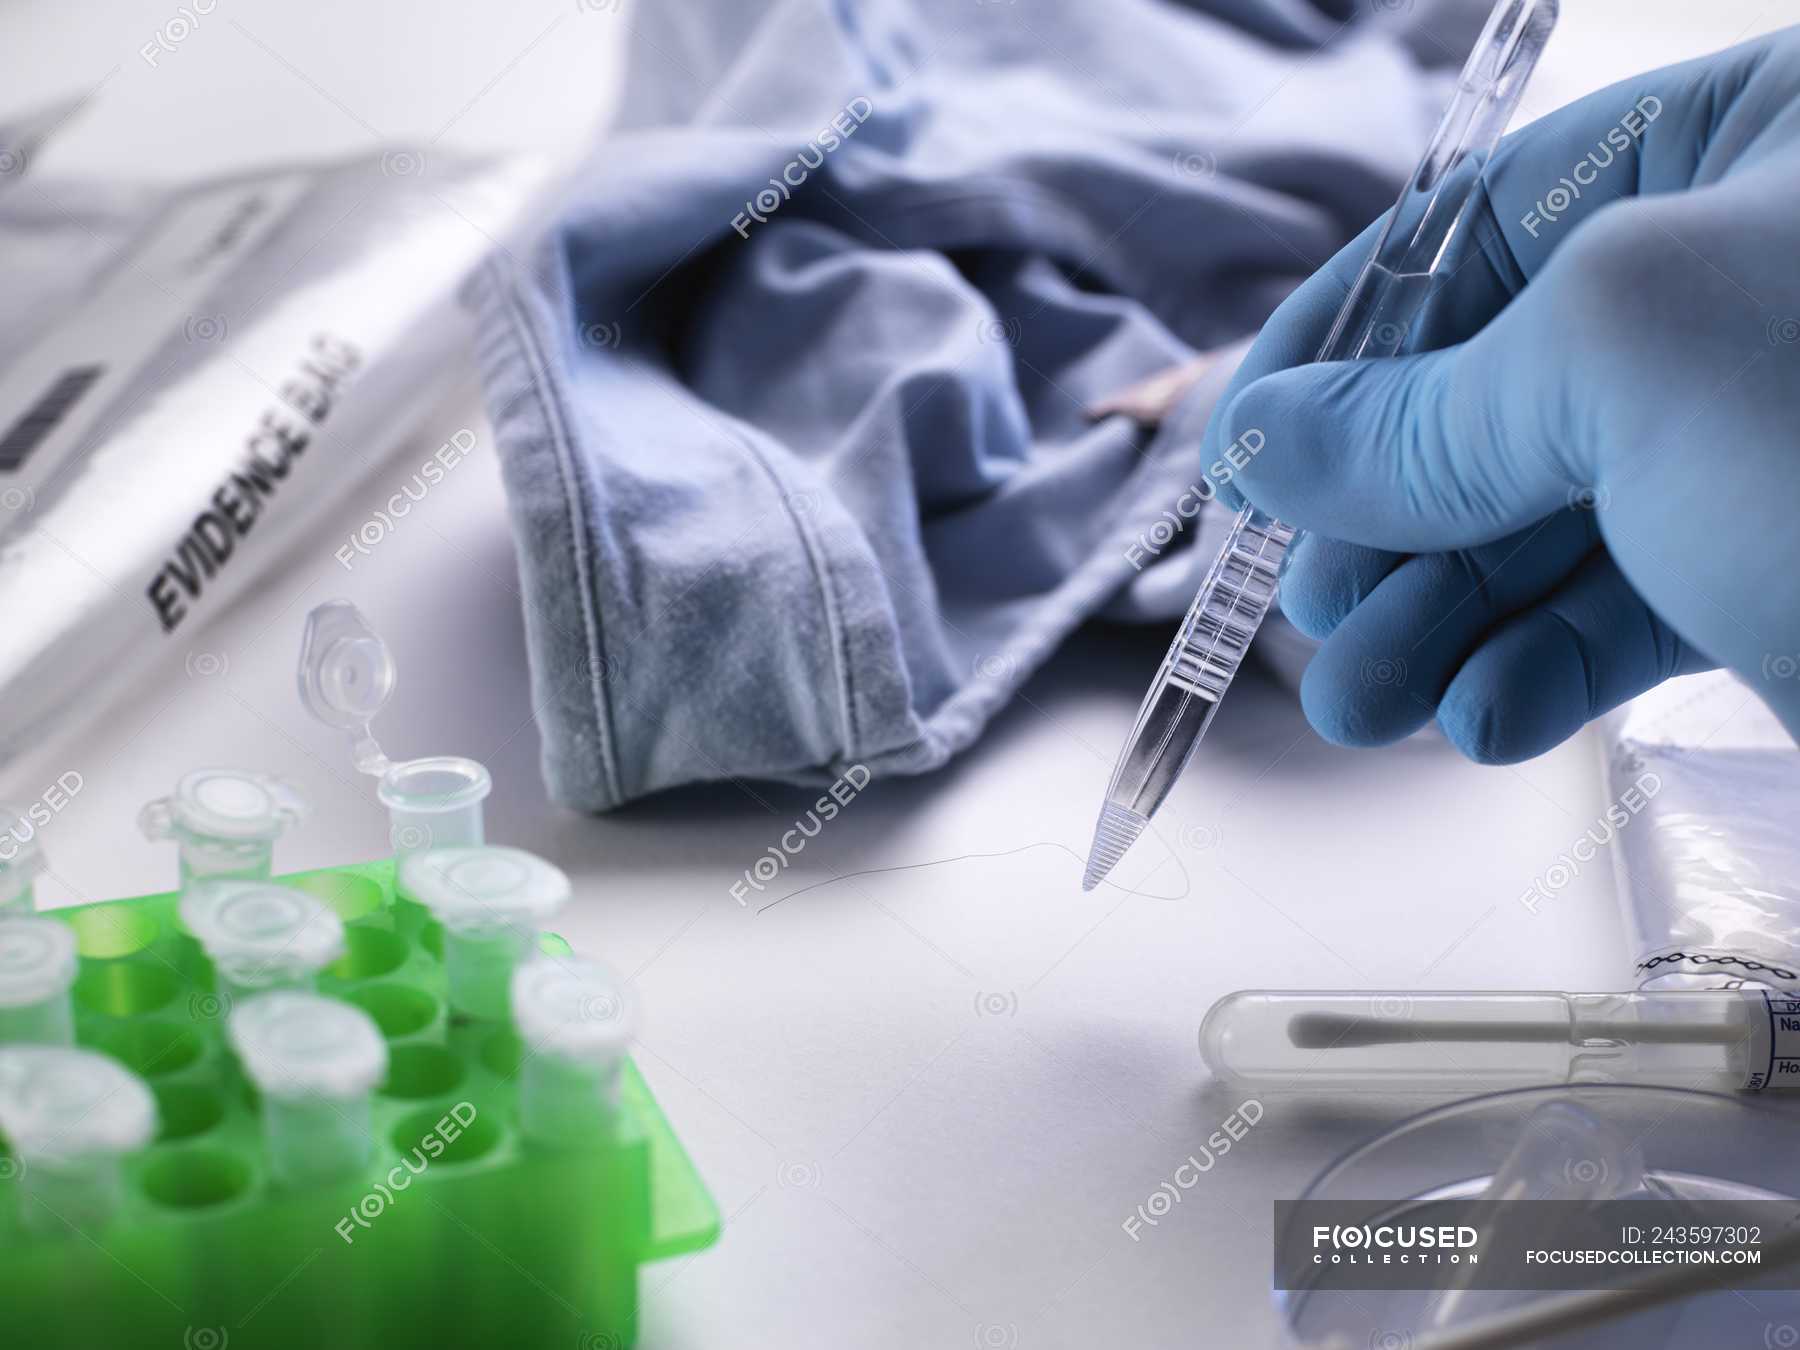 Forensic scientist taking hair specimen for DNA testing from clothing from  crime scene. — collection, assault - Stock Photo | #243597302